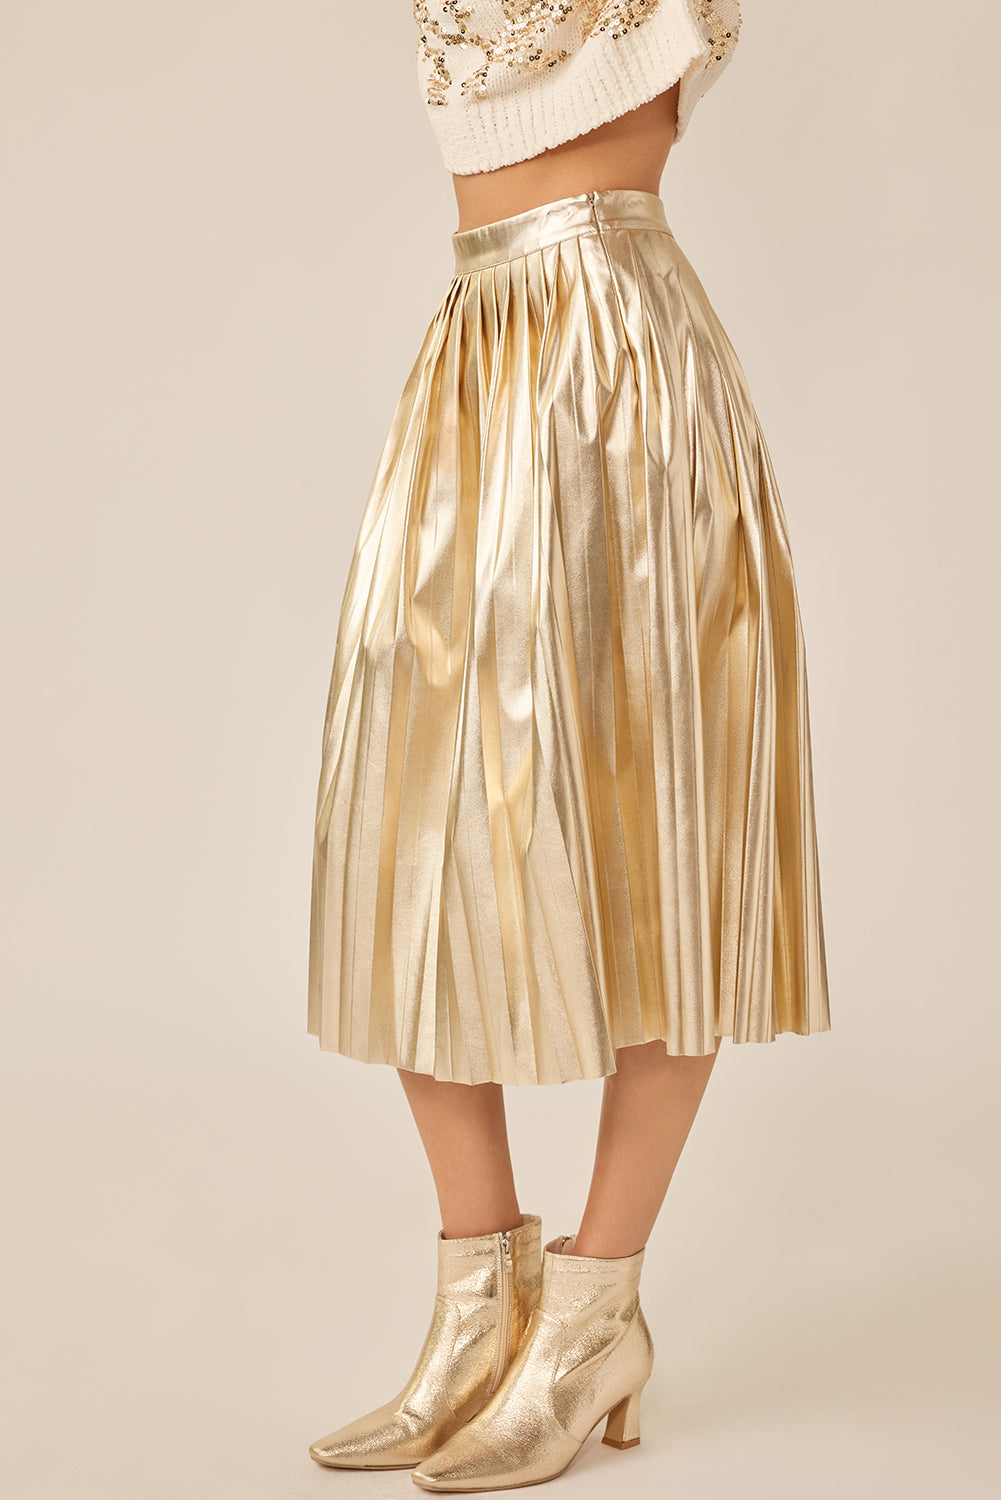 "Biltmore" Metallic Faux Leather Pleated Skirt - Gold